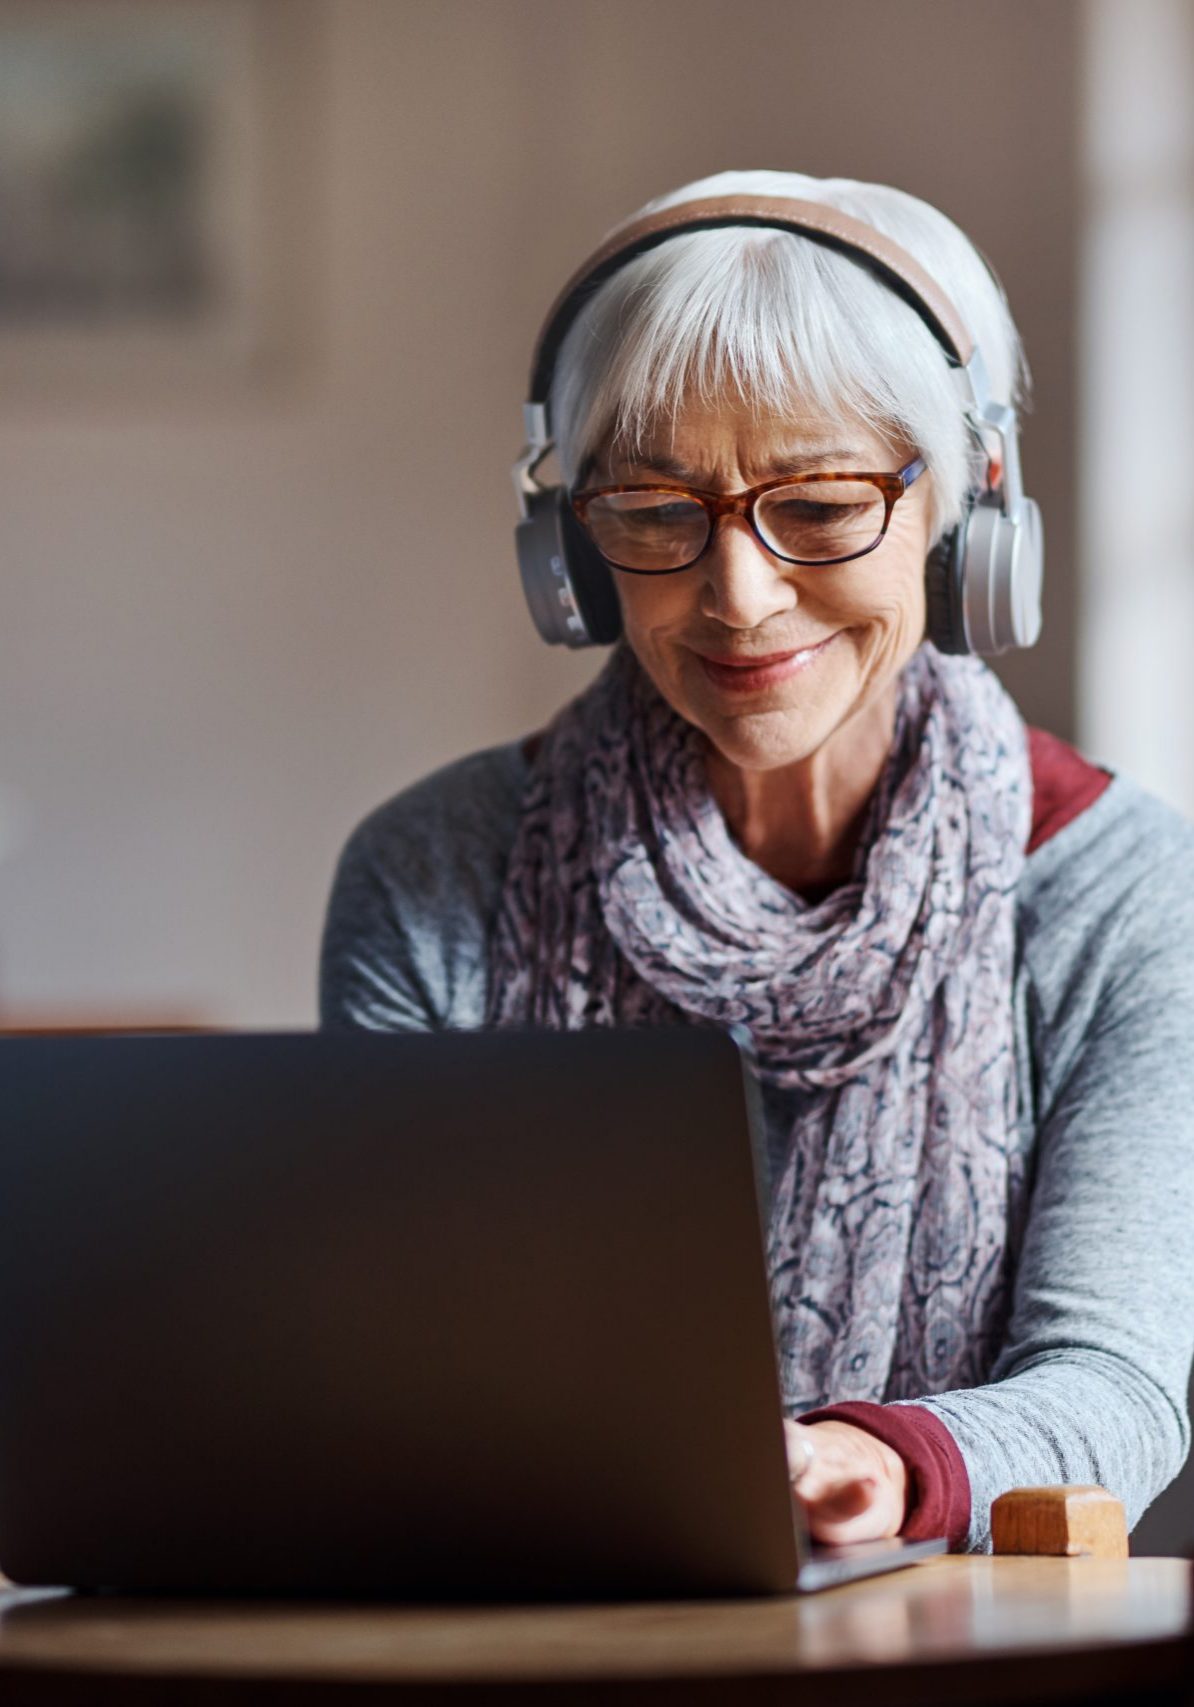 Shot of a senior woman using a laptop and headphones in a retirement home